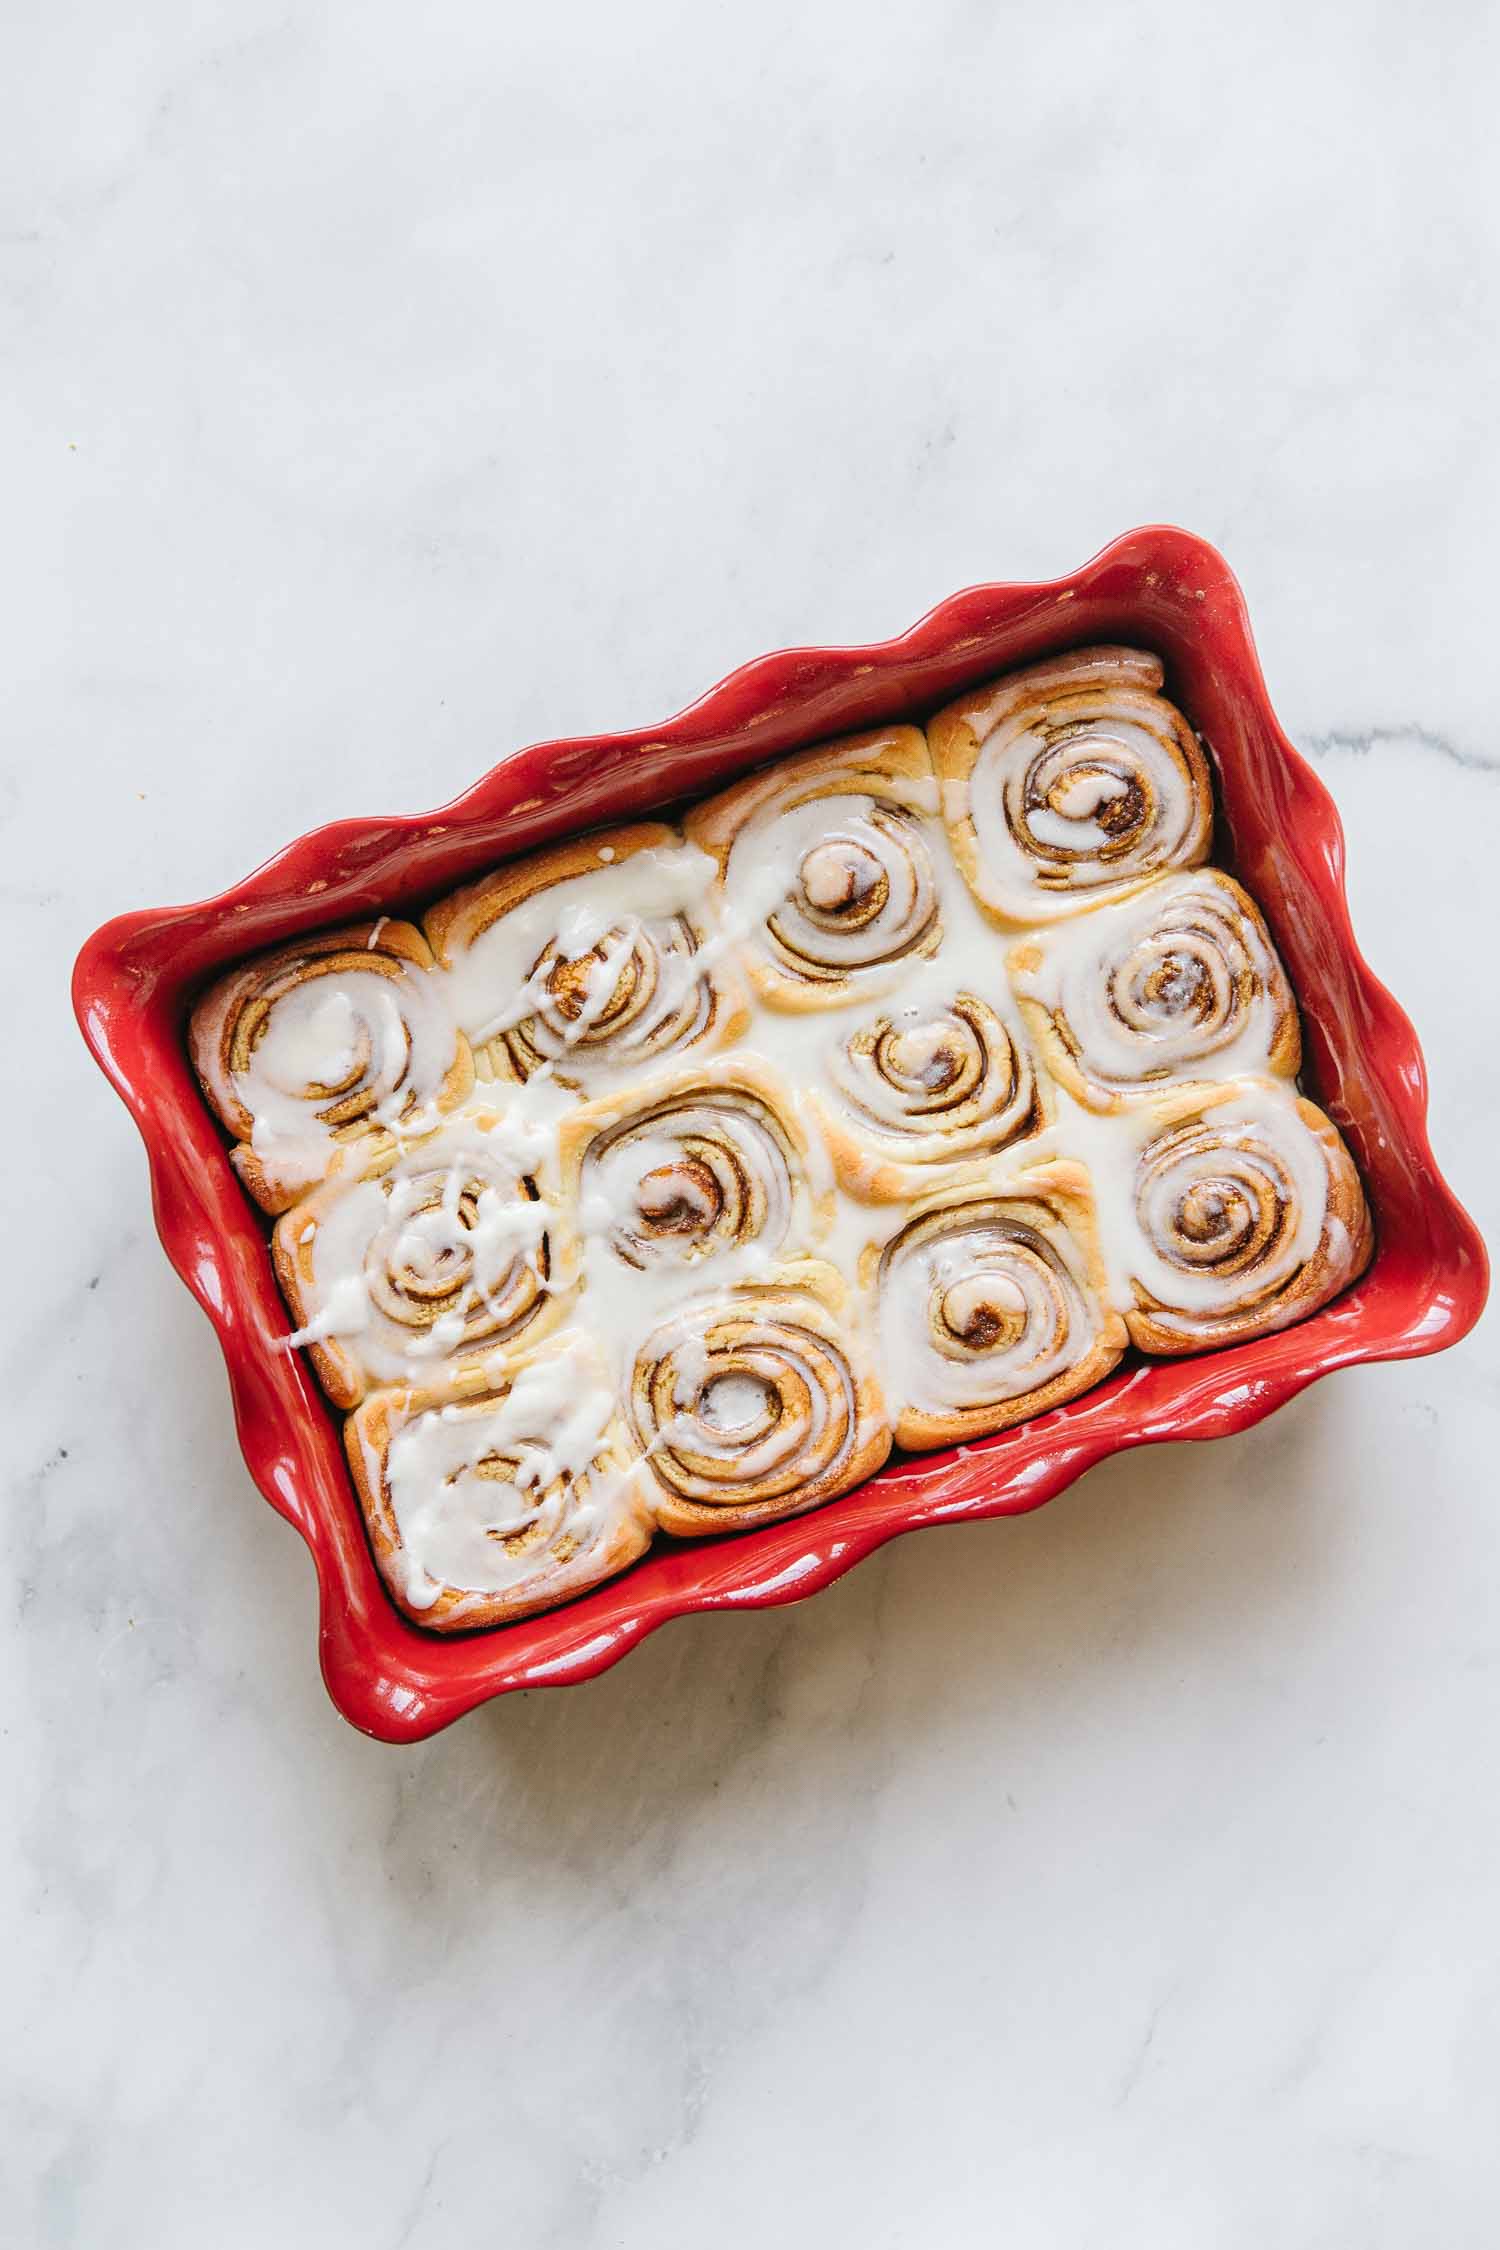 A red pan of cinnamon rolls with icing on it at a diagonal angle.